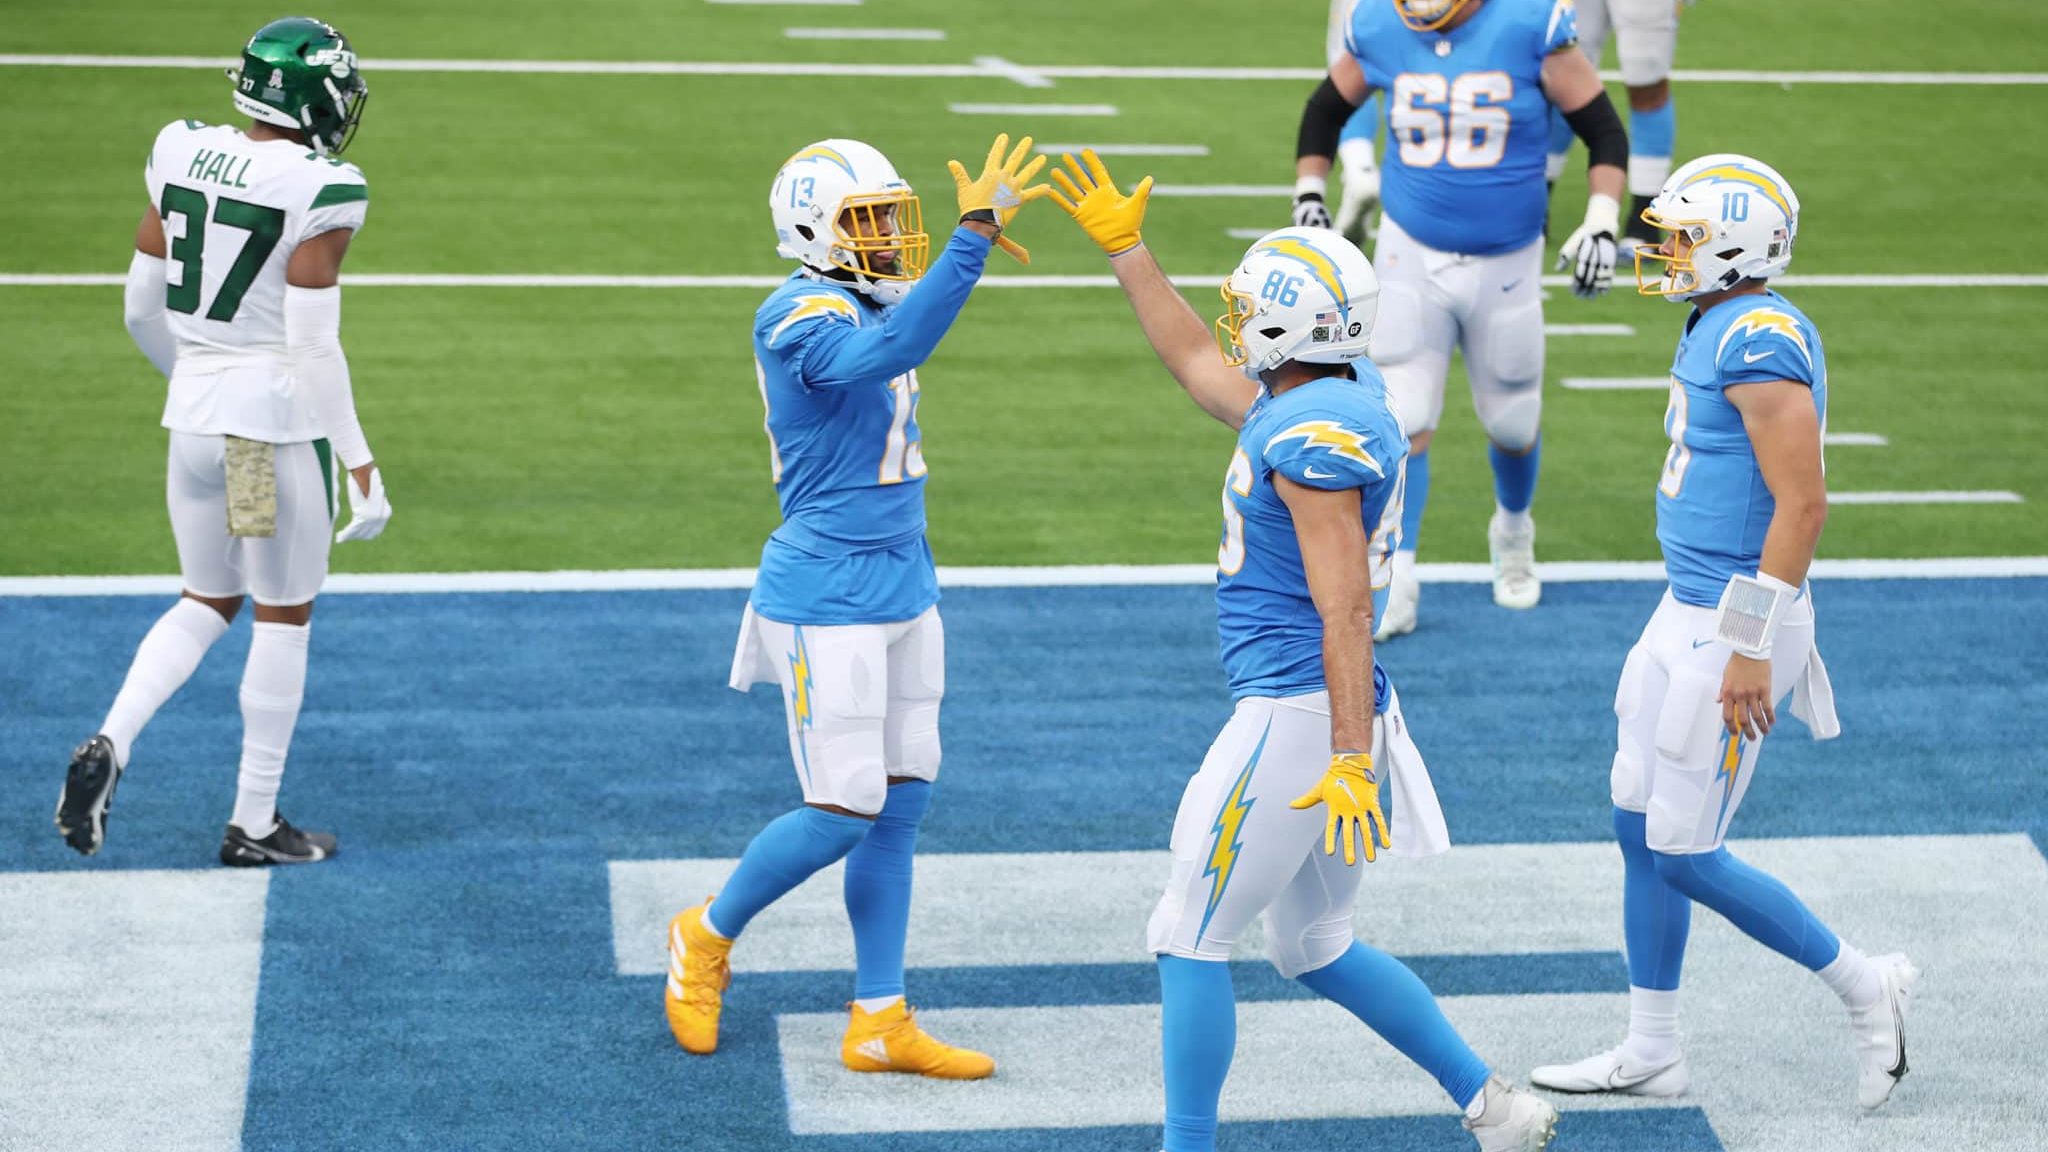 INGLEWOOD, CALIFORNIA - NOVEMBER 22: Hunter Henry #86 high-fives Keenan Allen #13 of the Los Angeles Chargers after Henry caught a touchdown pass during the first half against the New York Jets at SoFi Stadium on November 22, 2020 in Inglewood, California.